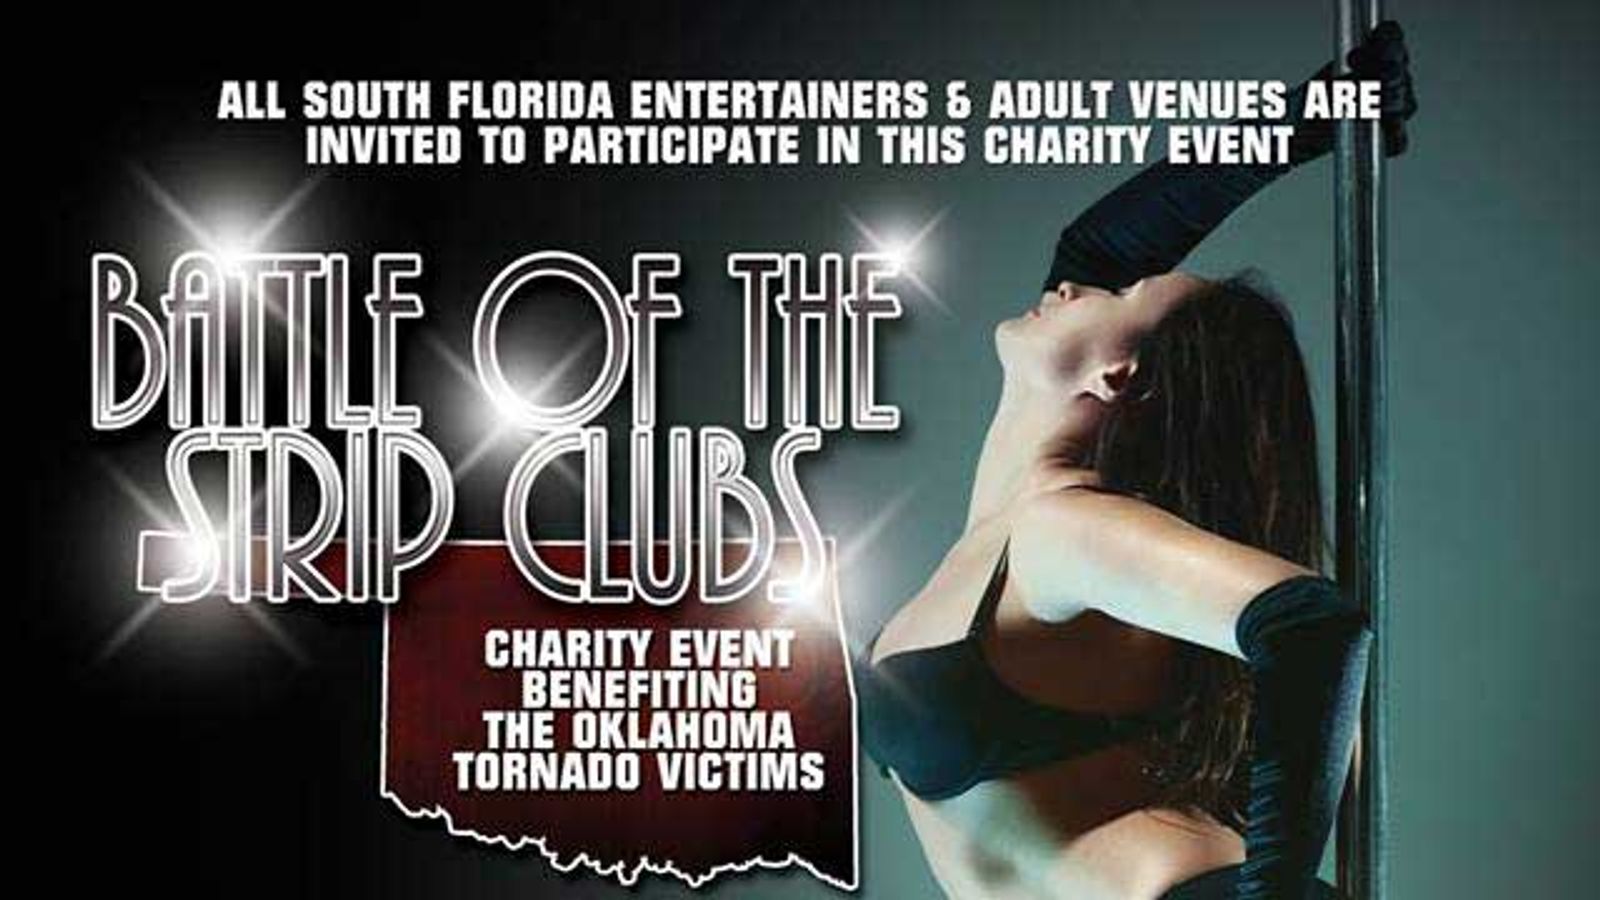 Tony Batman to Host ‘The Battle of the Strip Clubs’ Tuesday